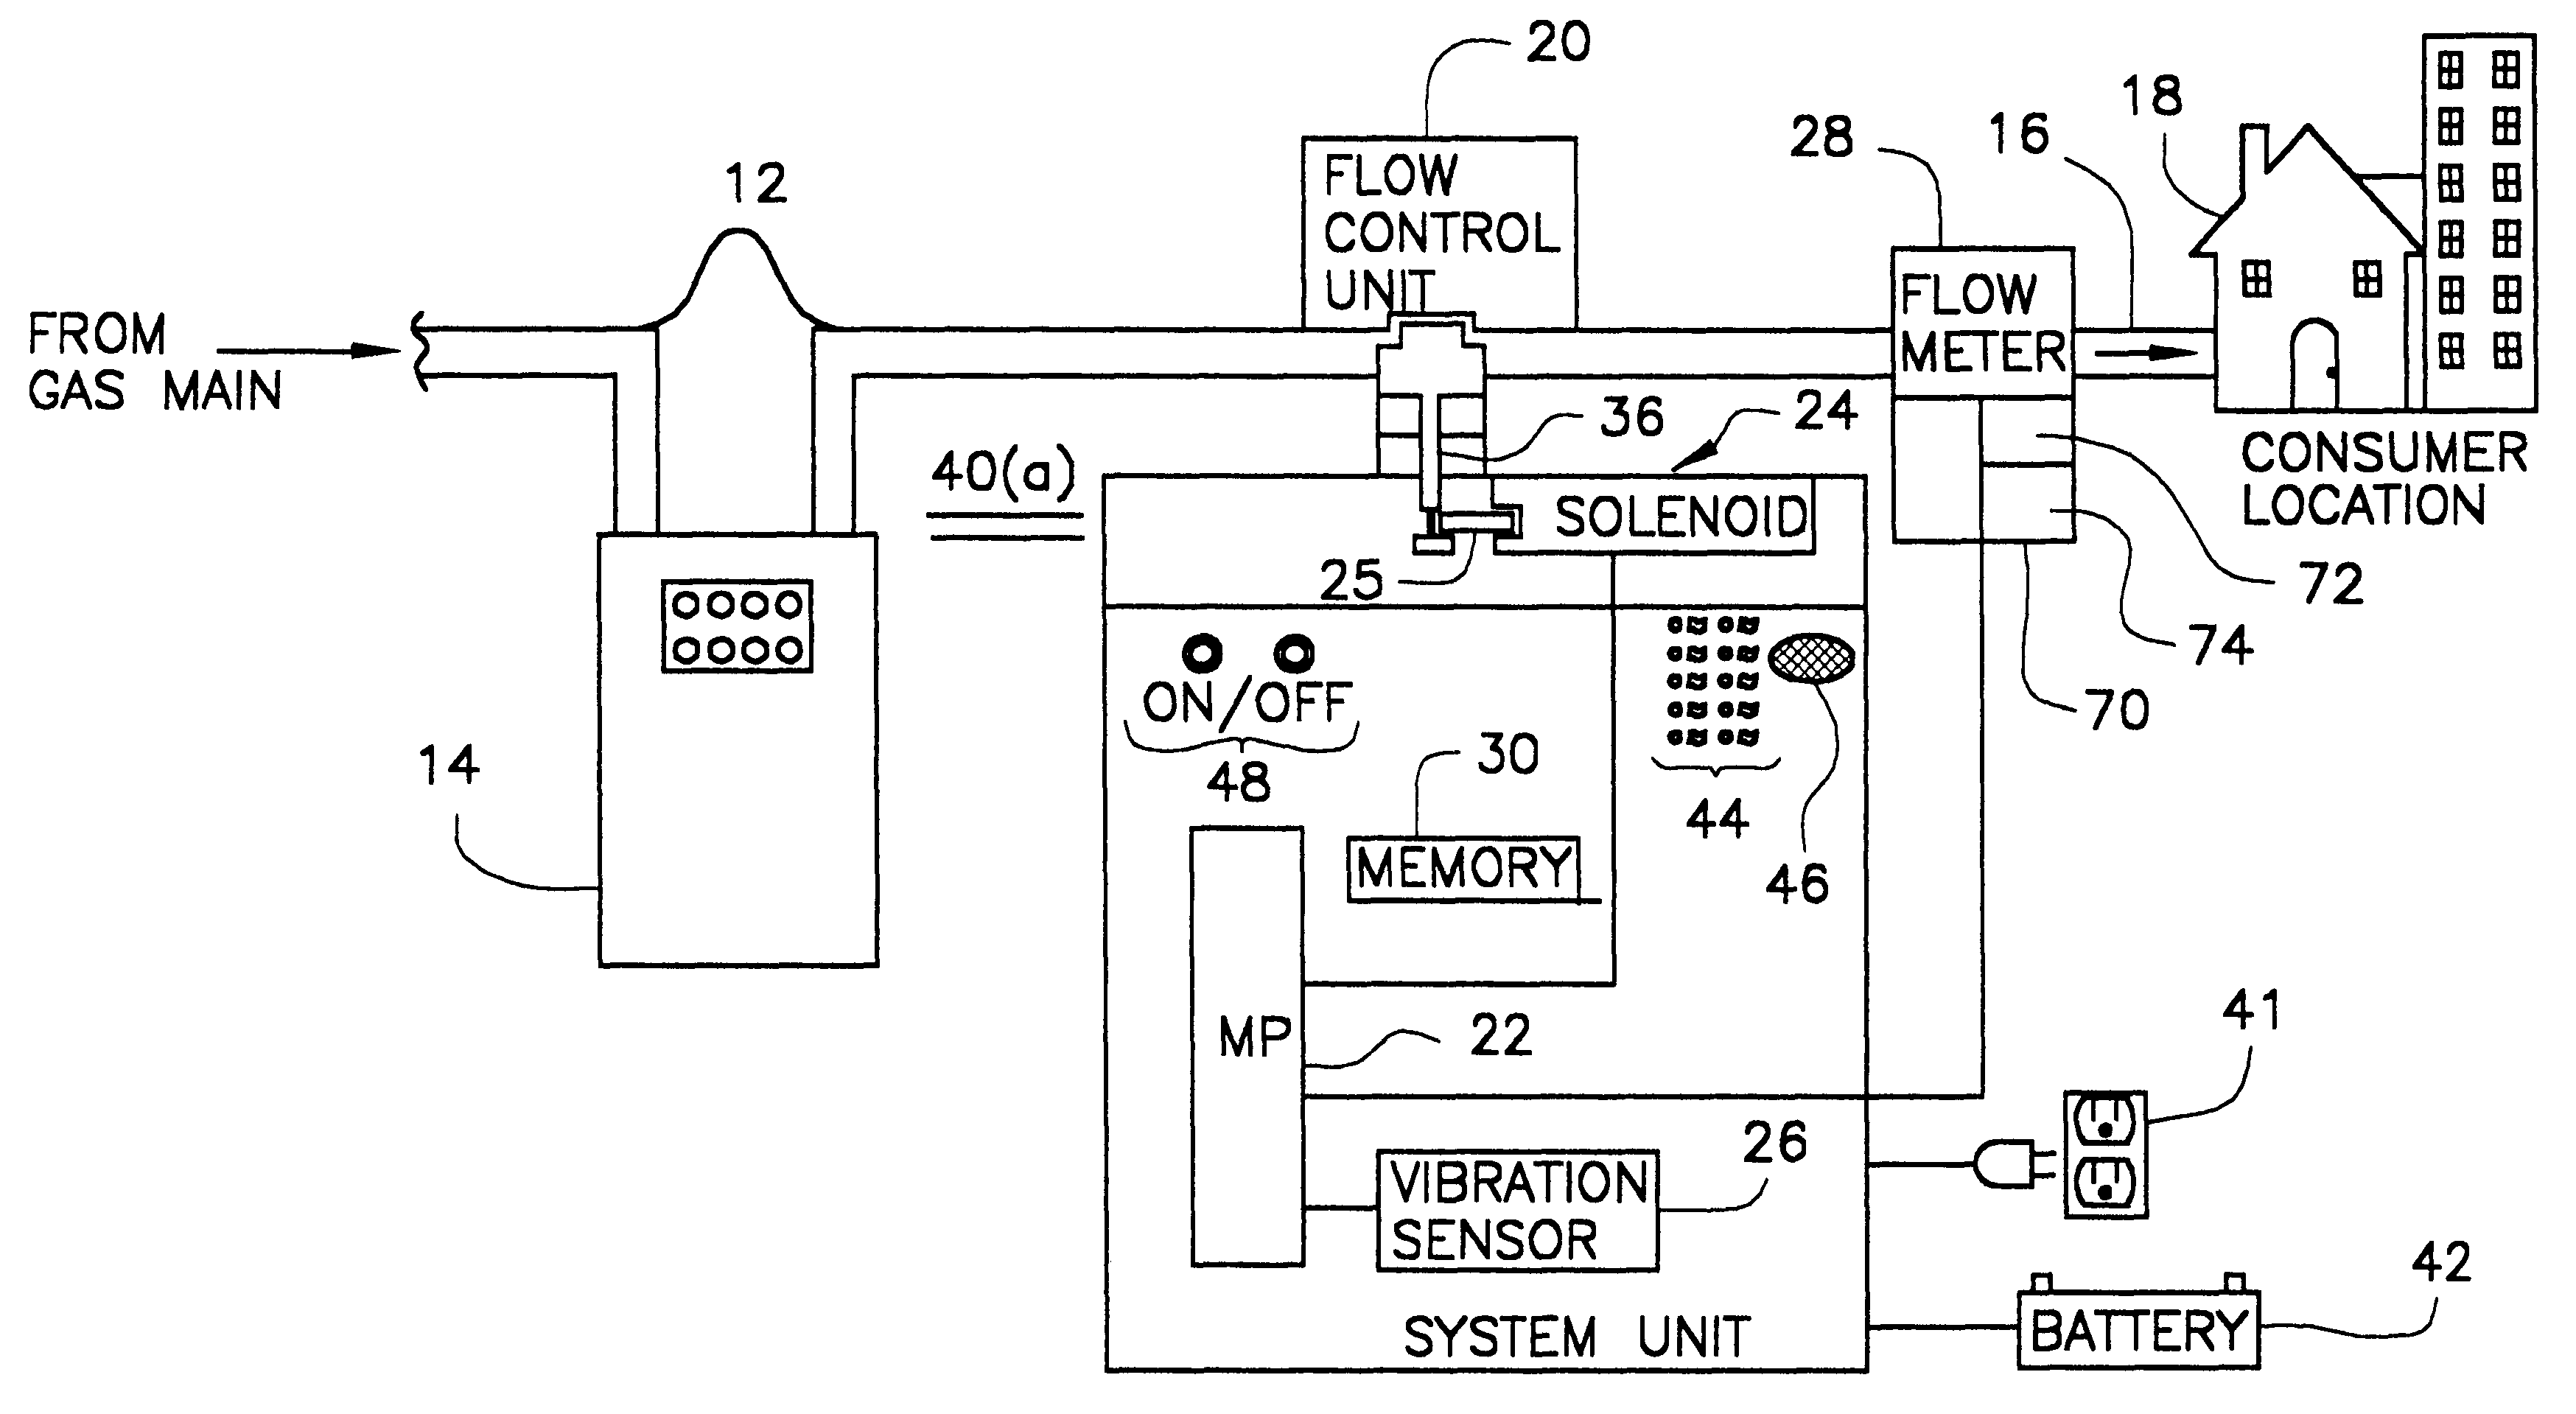 Enhanced and remote meter reading with vibration actuated valve